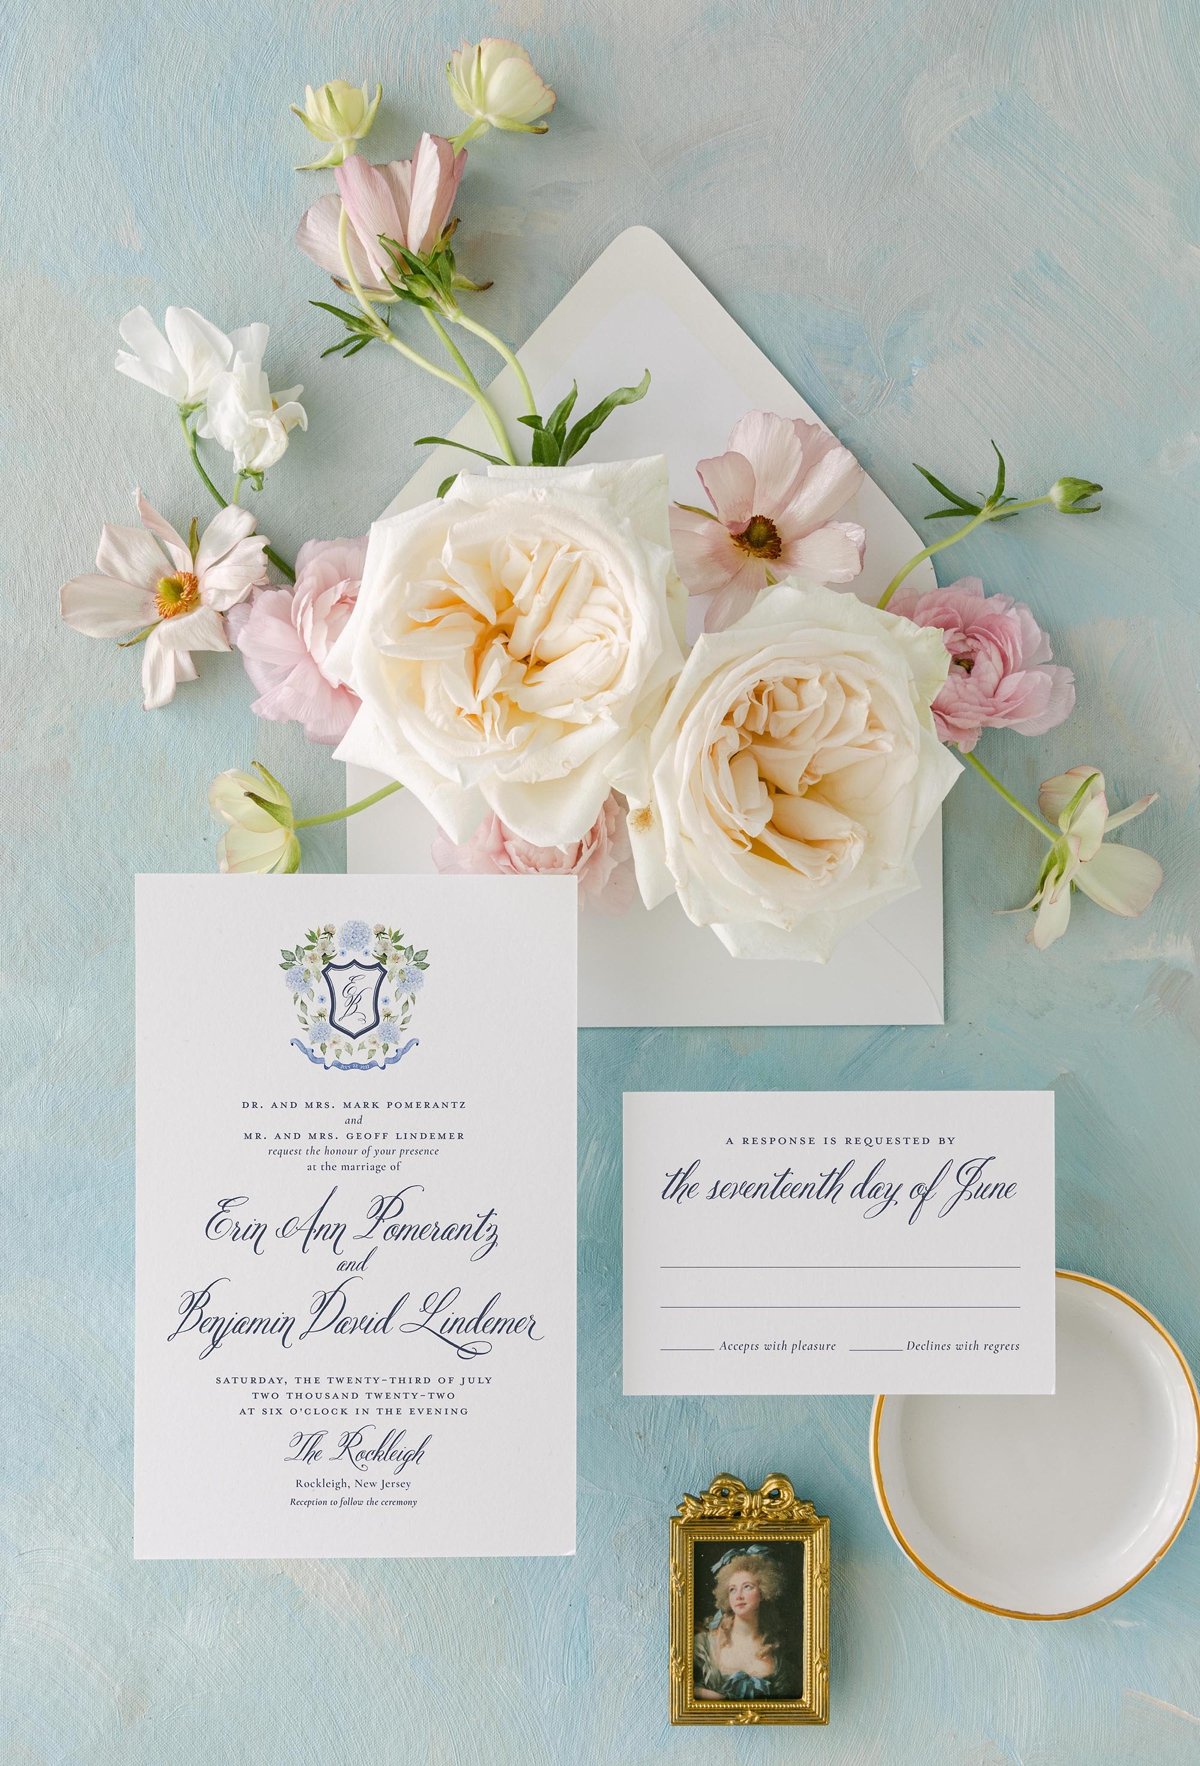 Tips for managing A and B wedding guest lists